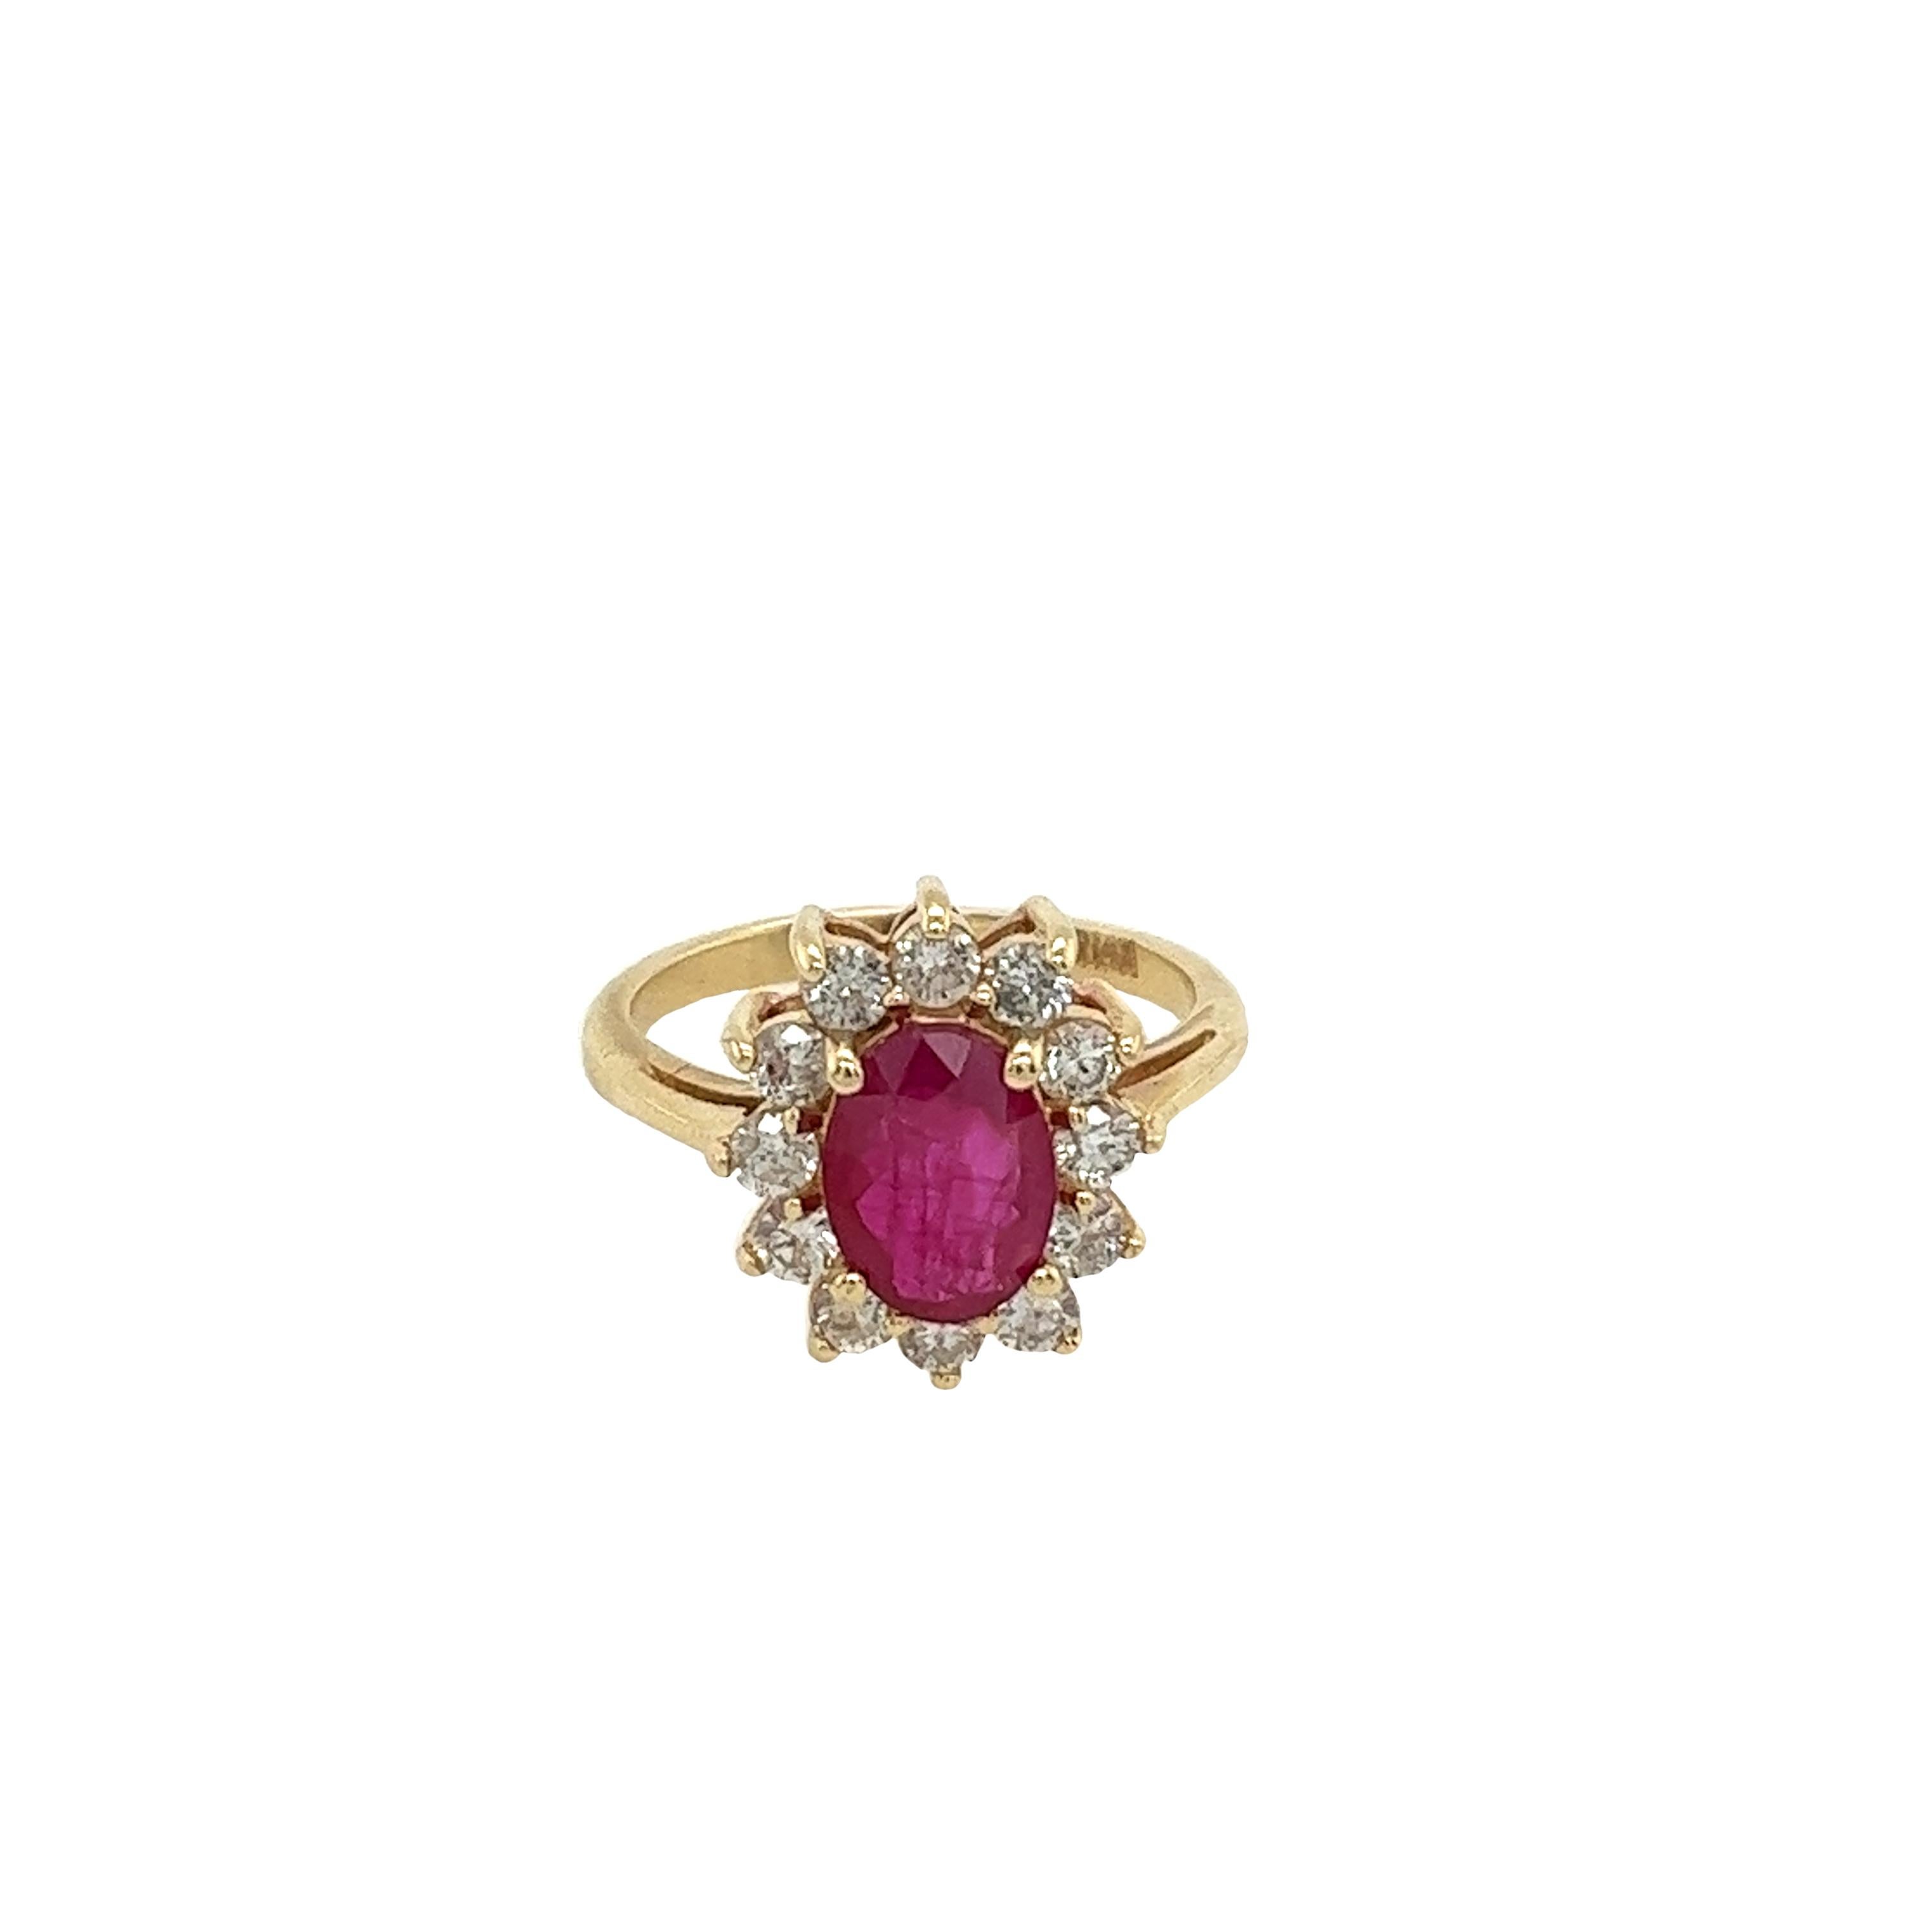 Ruby and diamond ring 
set with 1.25ct oval shape ruby
and 12 round brilliant cut diamonds with a 
total diamond weight is 0.50ct set in 14ct yellow gold setting.
Total Weight: 3.3g
Ring Size: J1/2
Width of Band: 2mm
Width of Head: 13.95mm
Length of